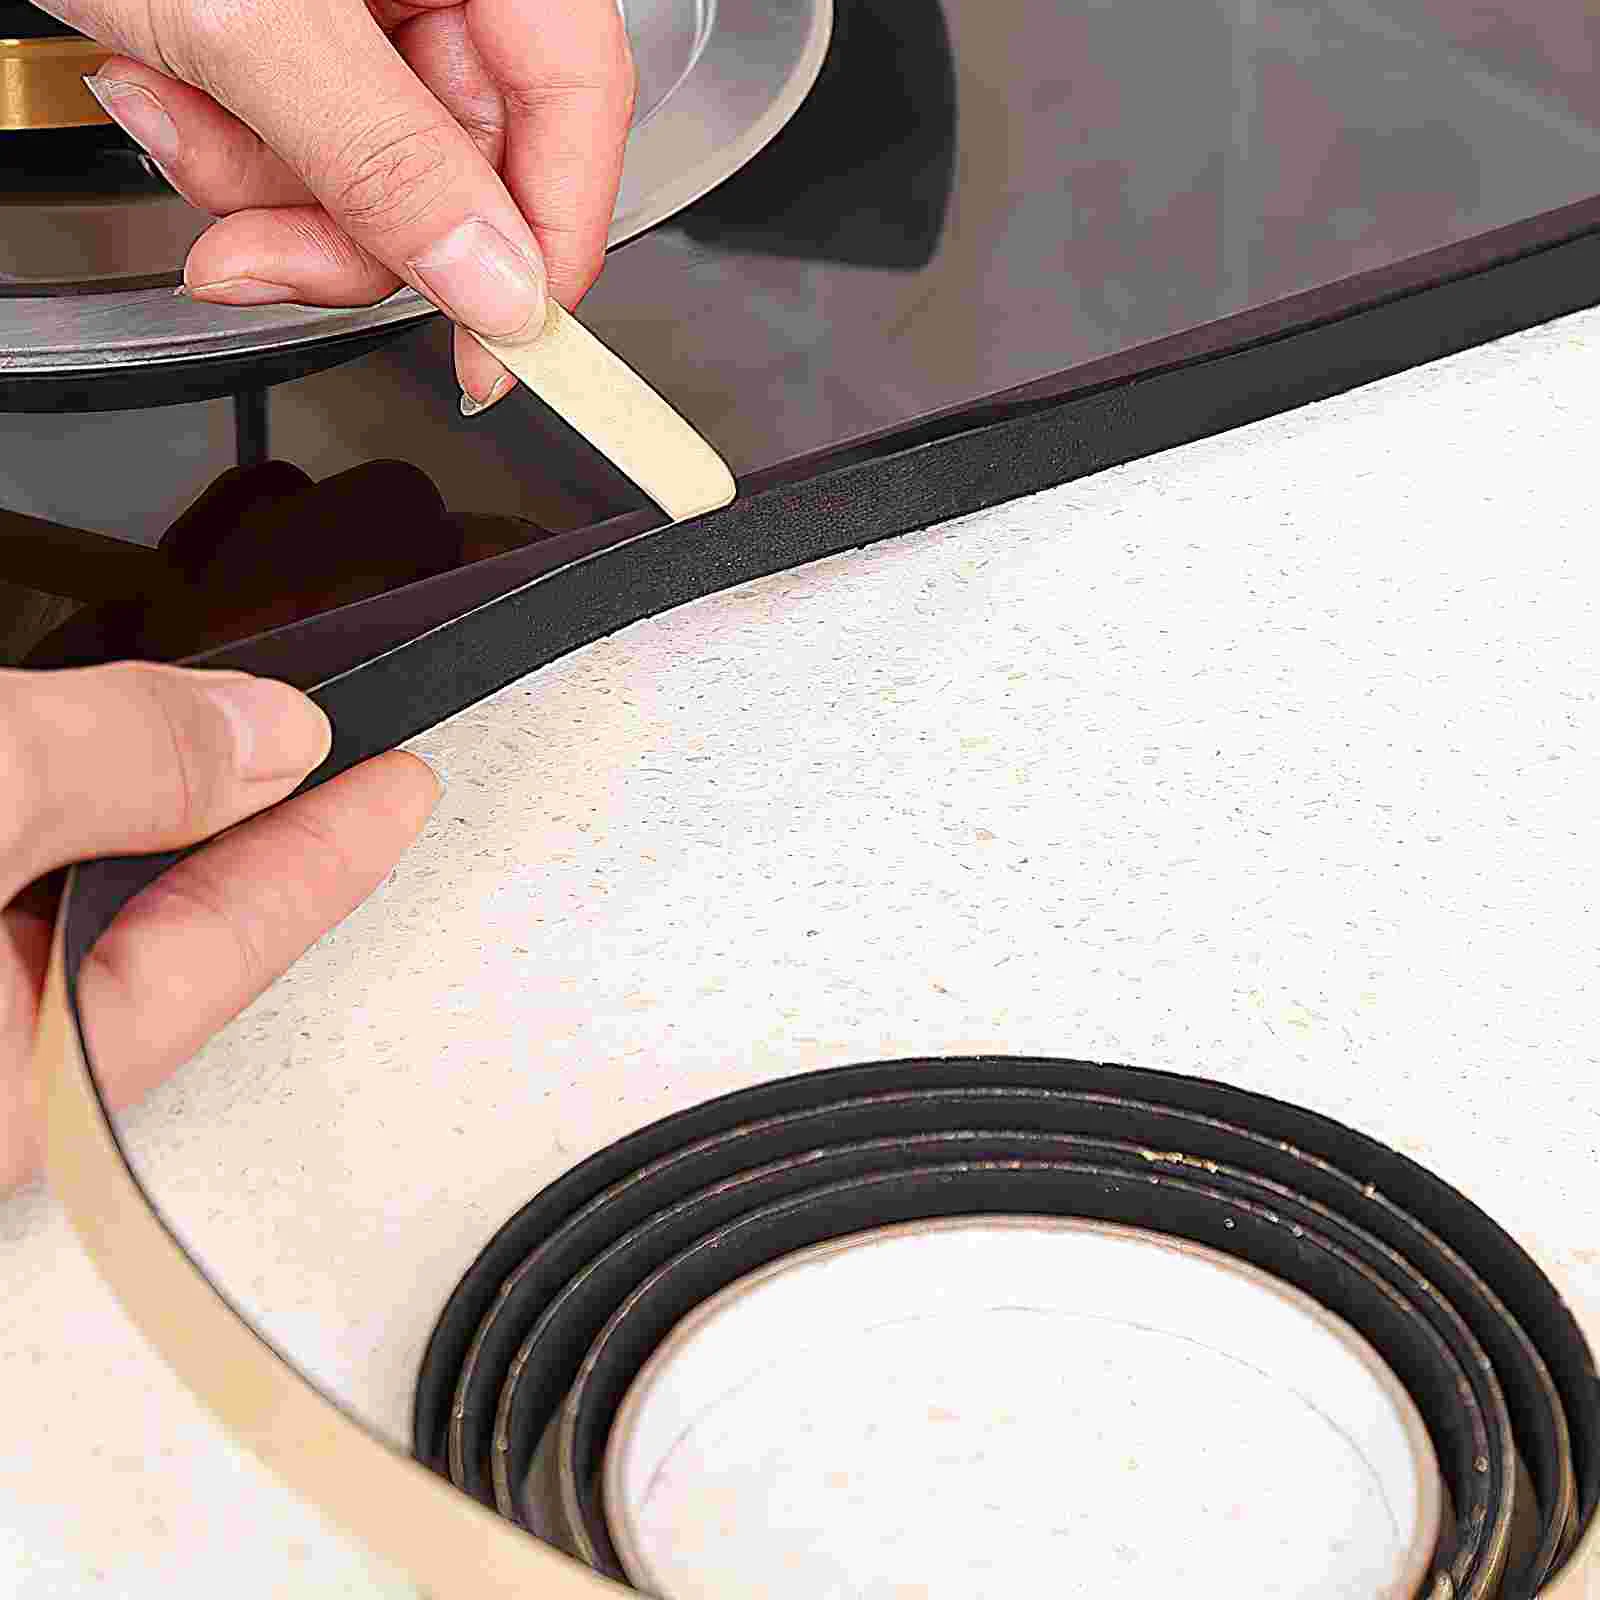 Gas Hob Gasket Ceramic Sealant Cooker Sealing Strip Black White Out Tape Tapes Tool Adhesive Pipeline